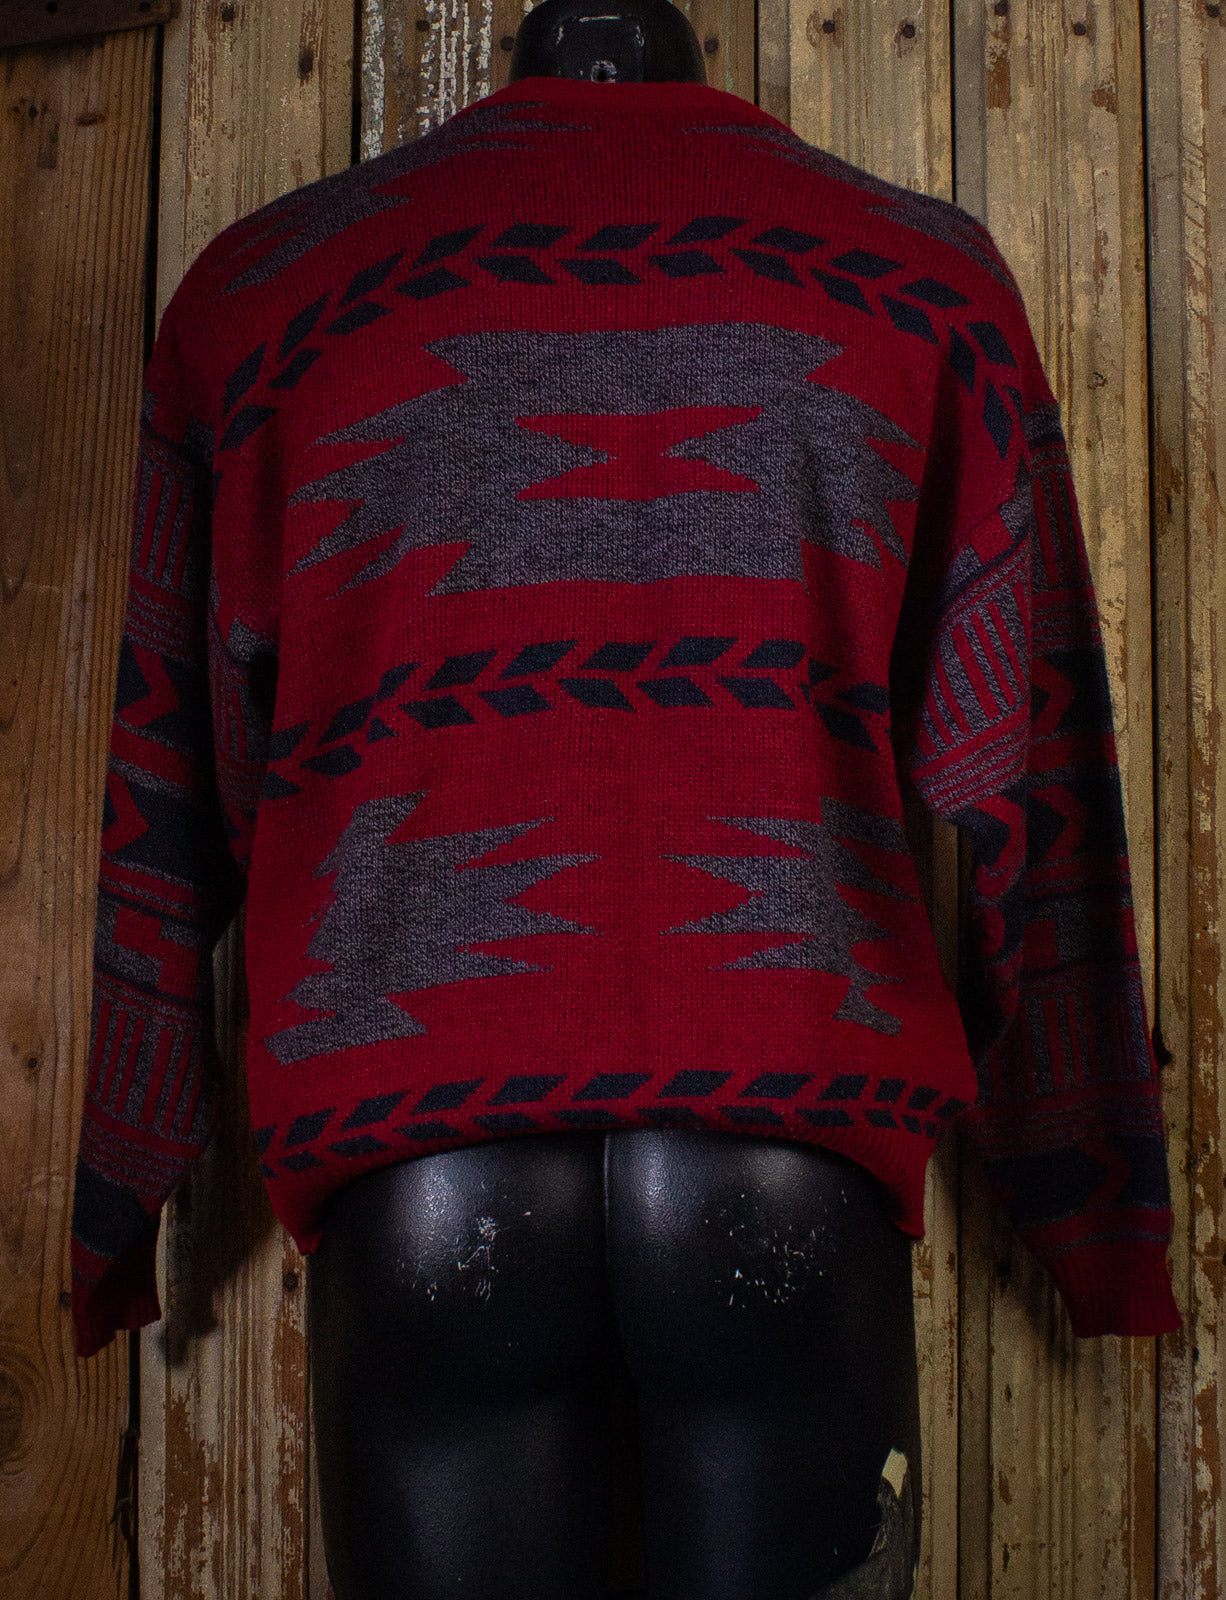 Vintage Daniel Axel Aztec Print  Knit Sweater 80s Red Large